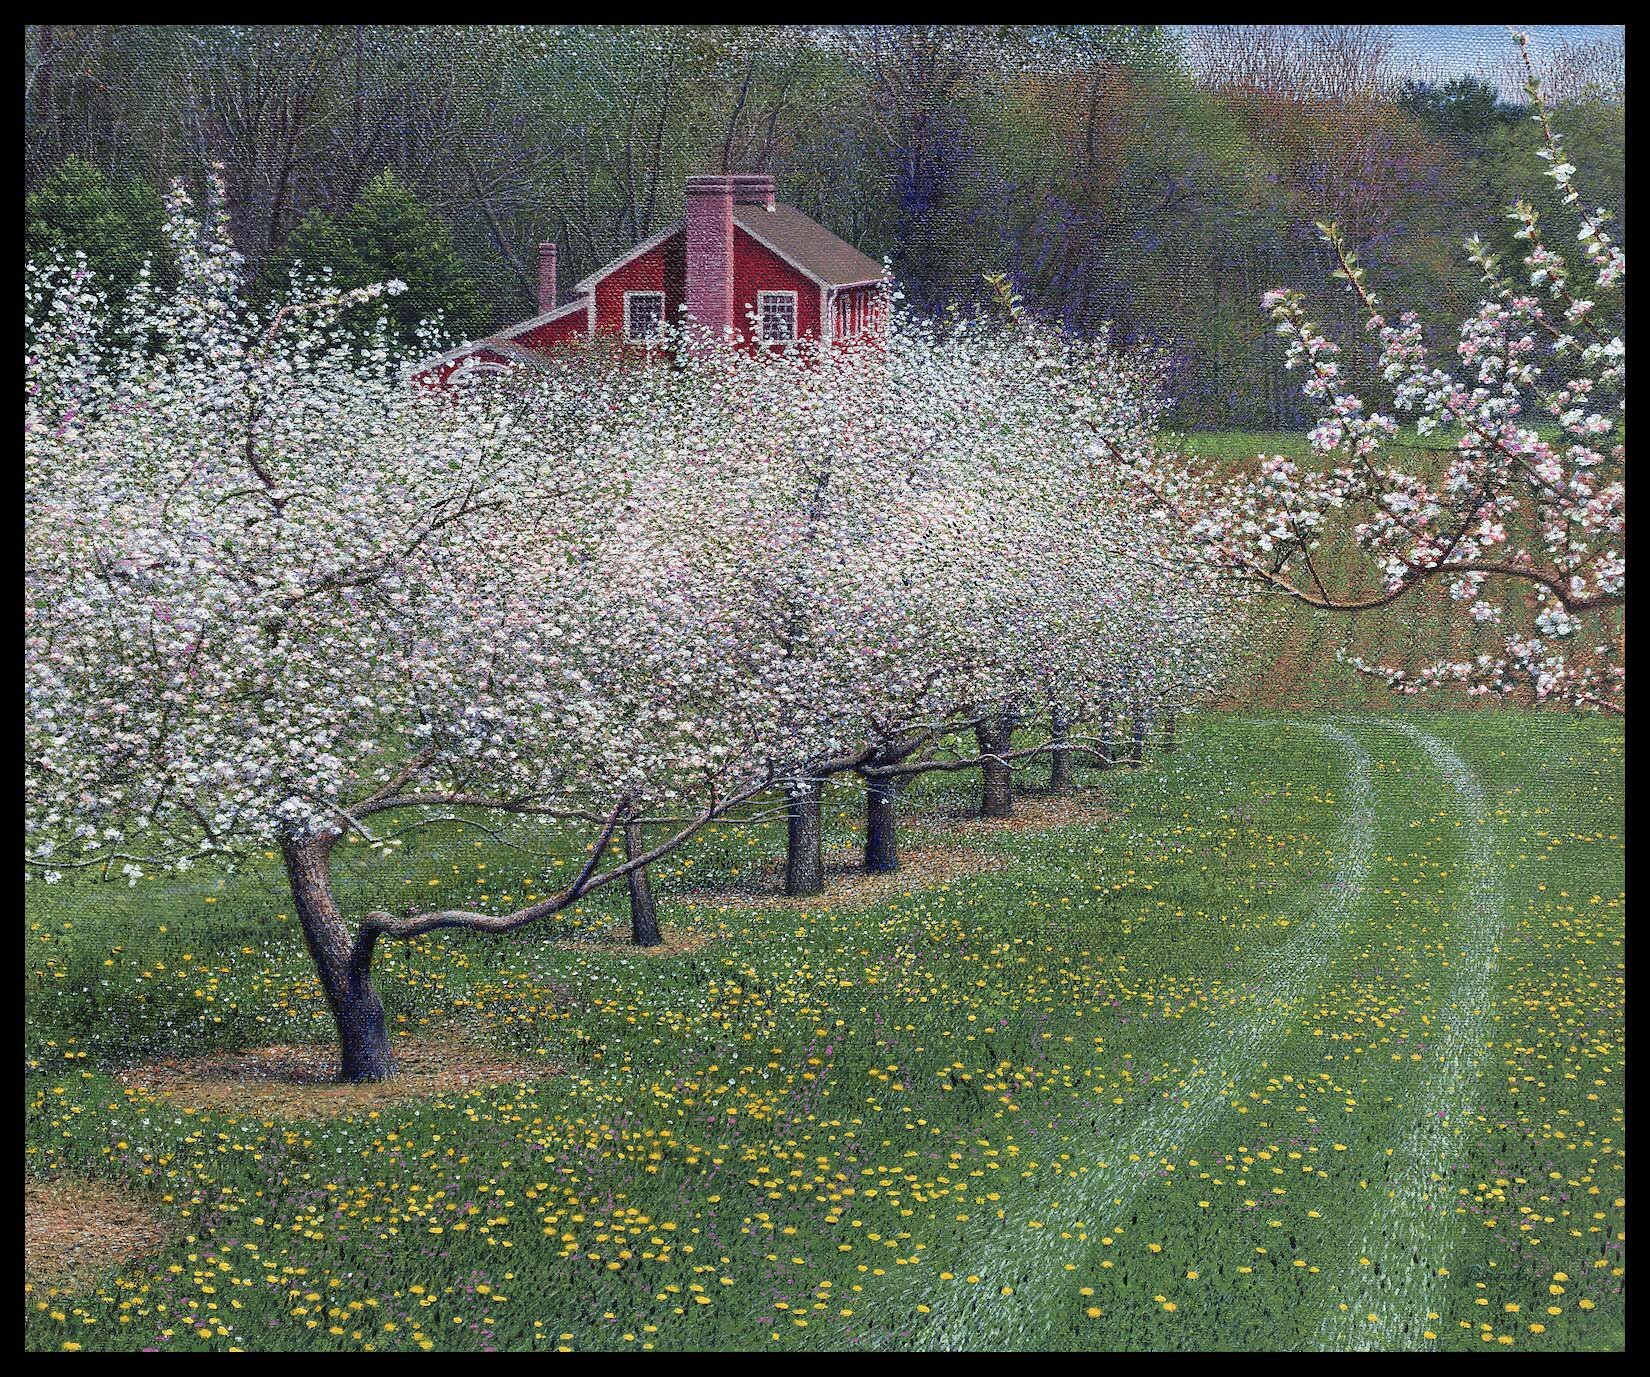  Farm House with Apple Orchard in Spring (21”x23”) Oil on Linen 